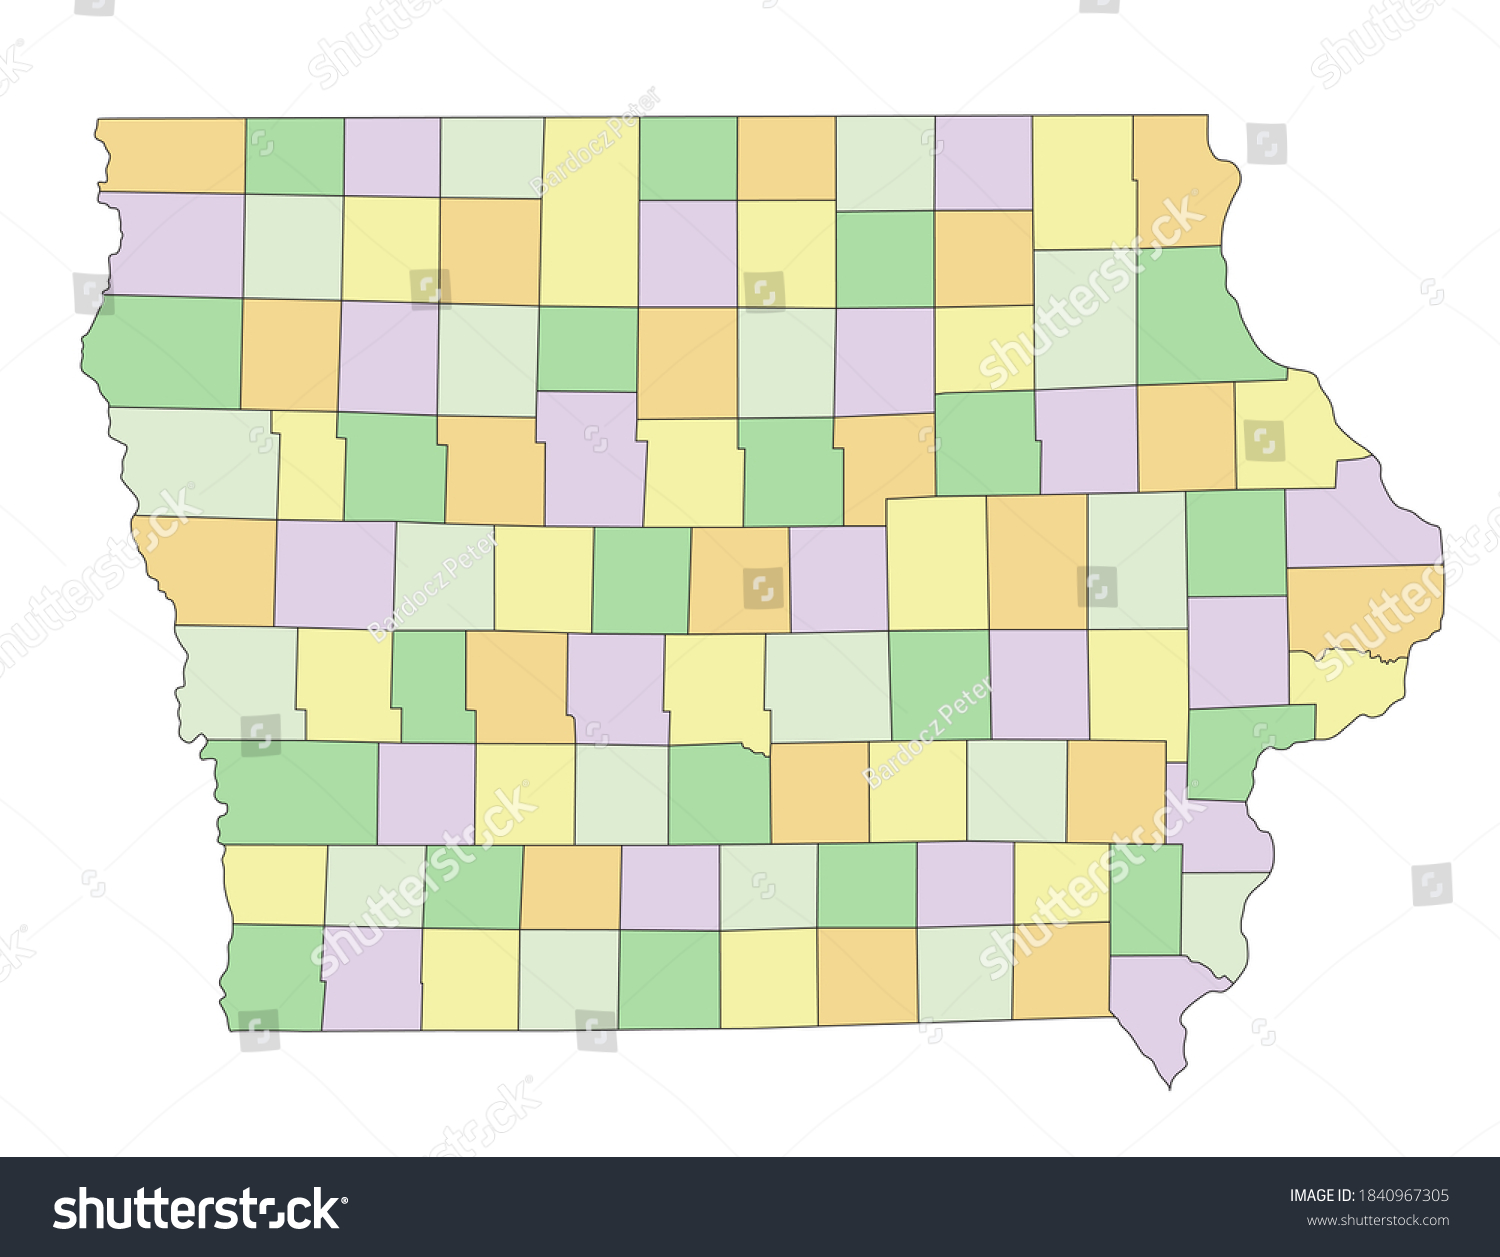 SVG of Iowa - Highly detailed editable political map. svg